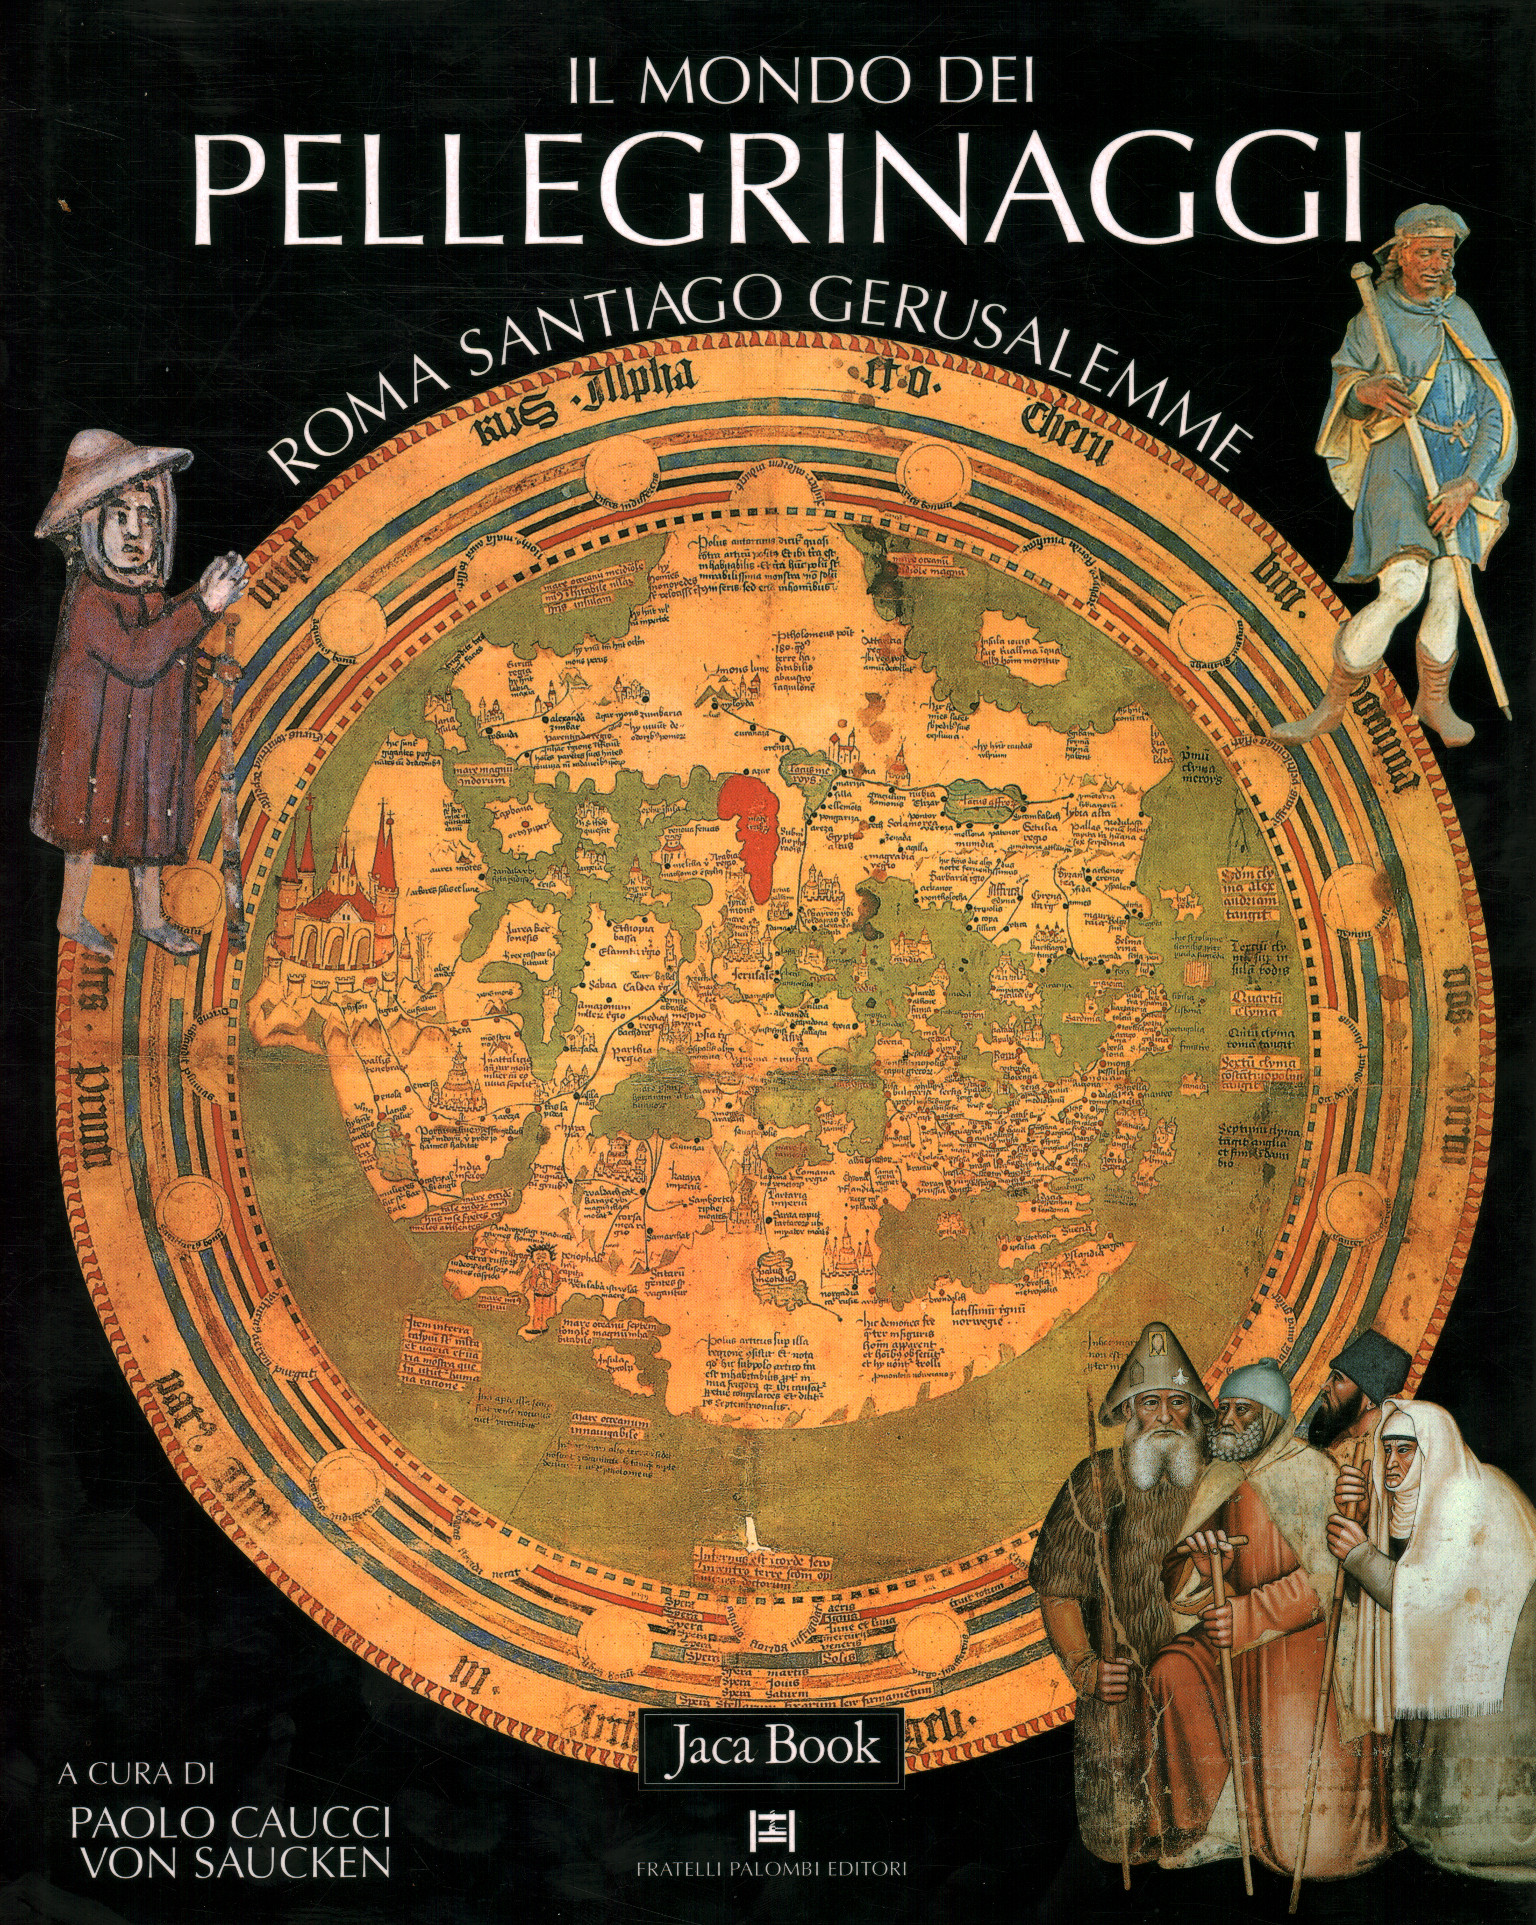 The world of pilgrimages. Roma Santia, The world of pilgrimages. Roma Santia, The world of pilgrimages. Holy Rome